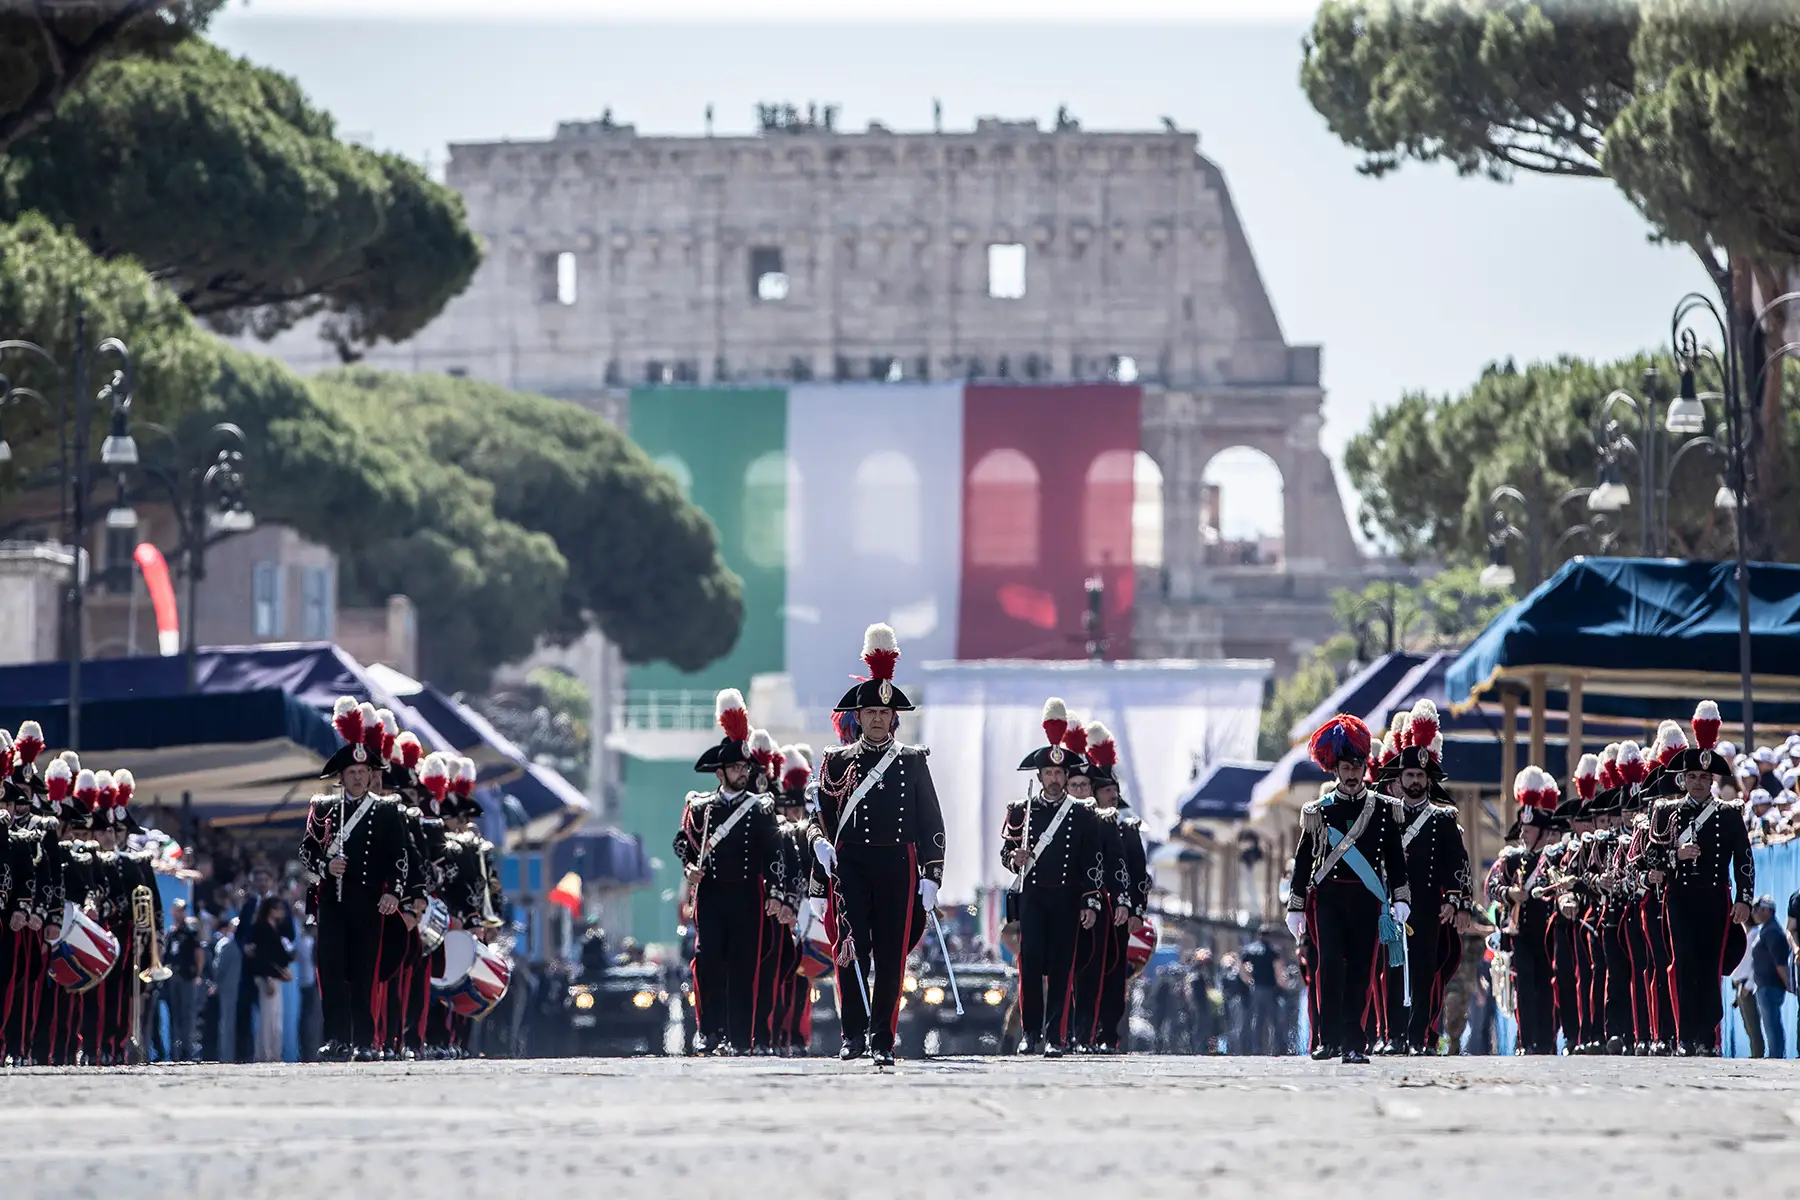 A military parade in front of the Colosseum in Rome